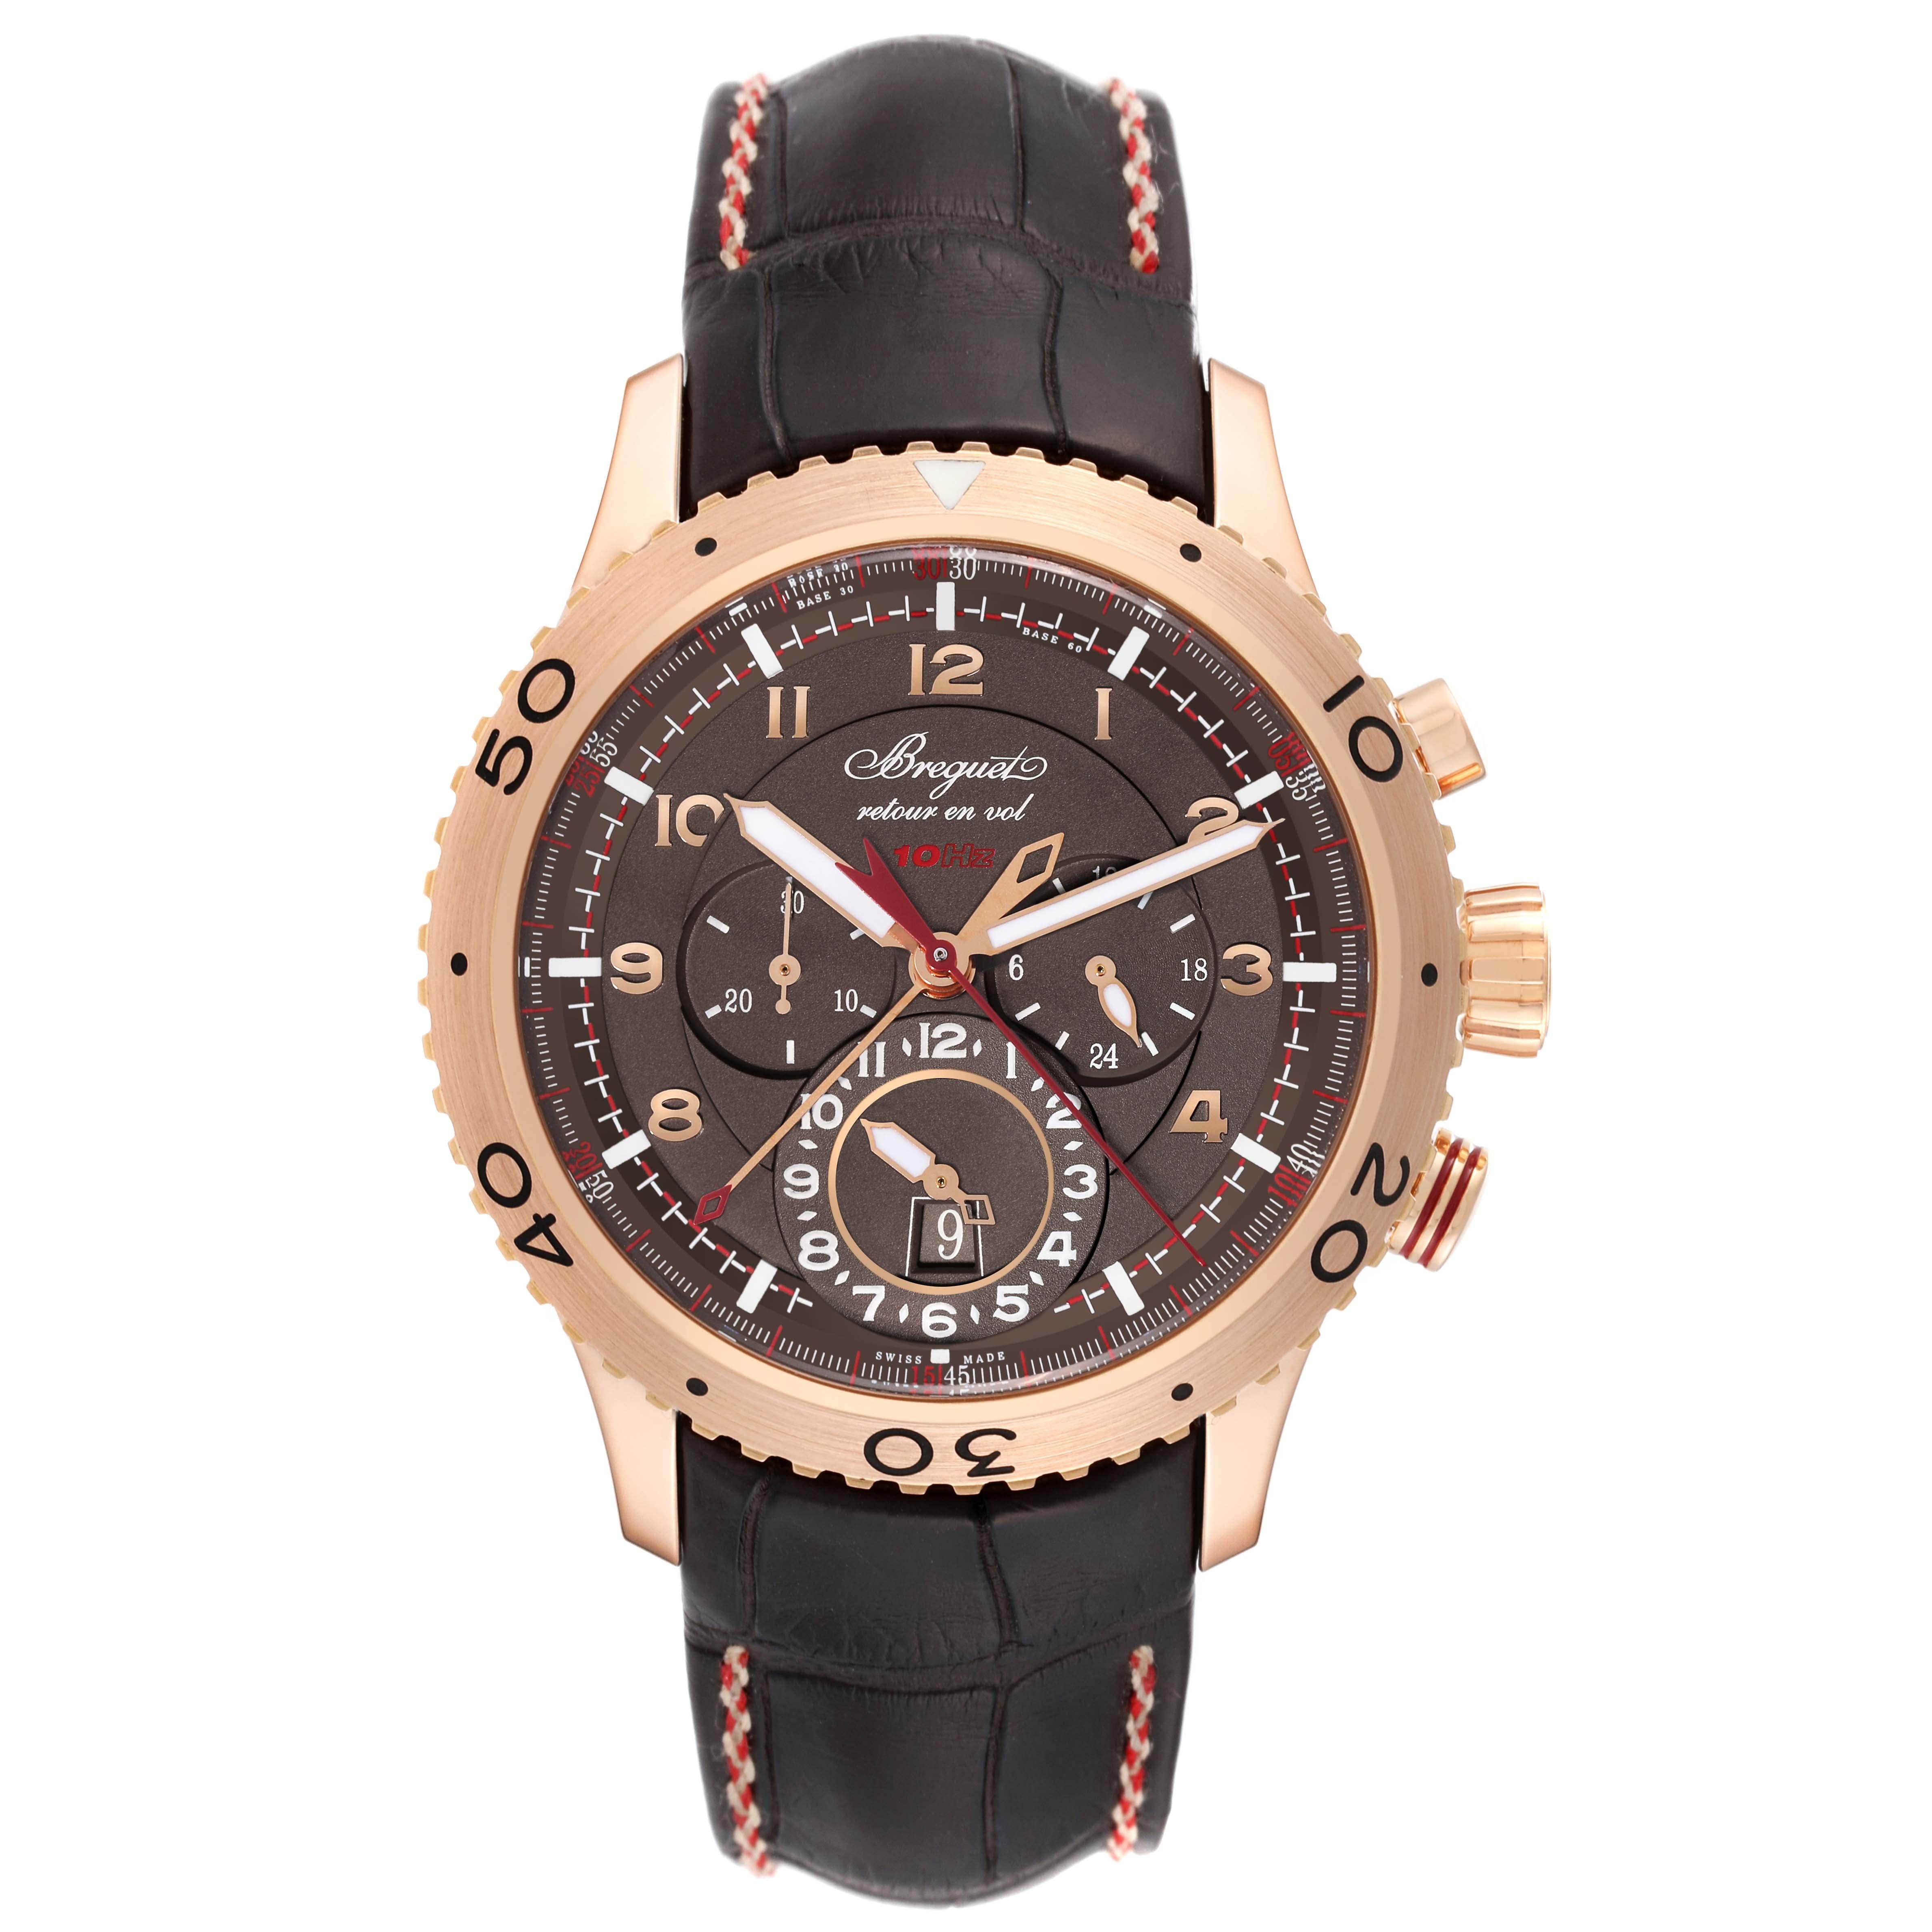 Breguet Type XXII Flyback Brown Dial Rose Gold Mens Watch 3880BR Box Papers. Automatic self-winding movement with a flyback chronograph function (allows instant restarting of the chronograph with a single push of the button instead of stop and reset